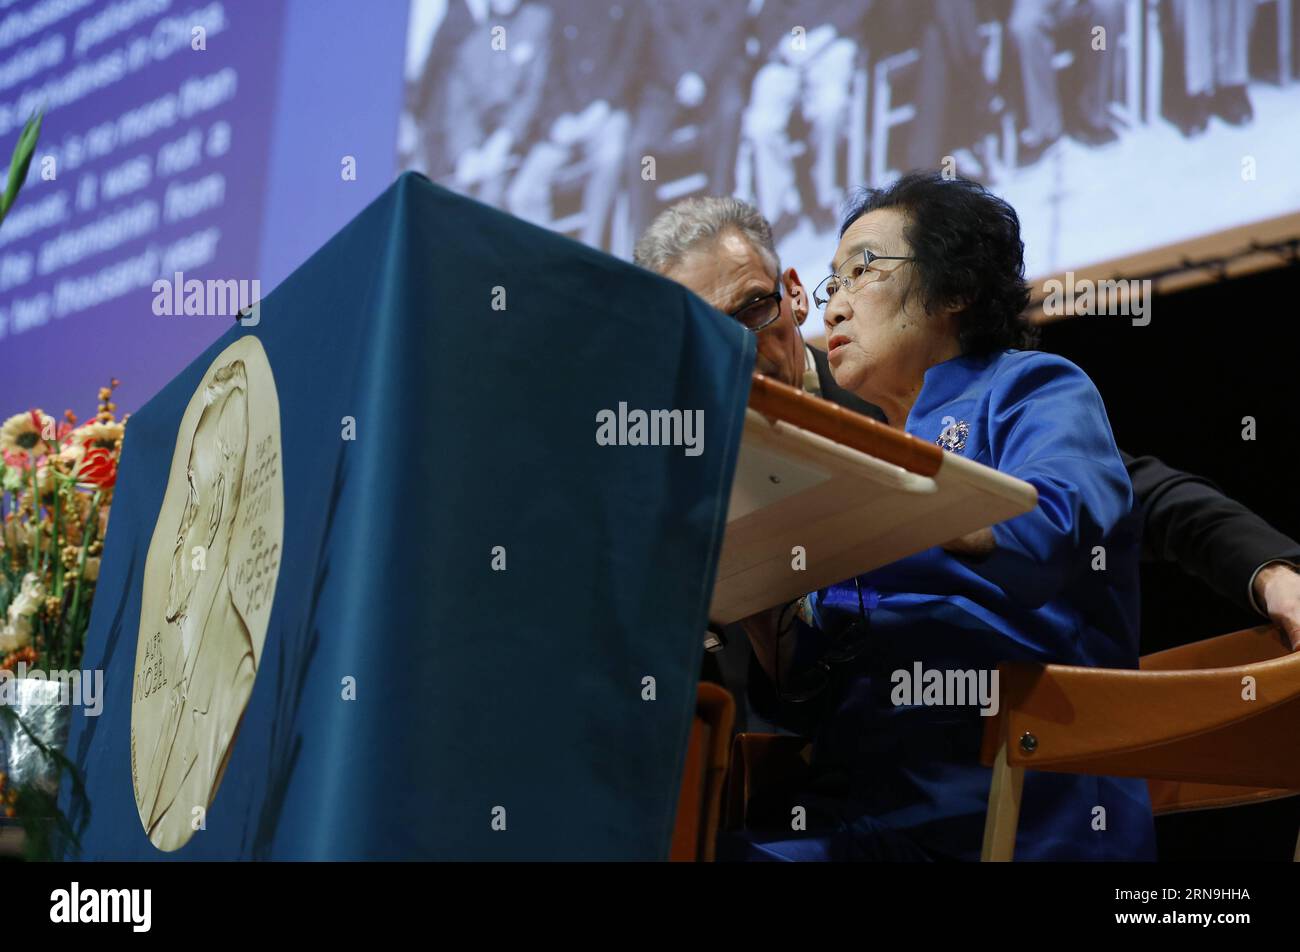 (151207) -- STOCKHOLM, Dec. 7, 2015 -- China s Tu Youyou (R) who won 2015 Nobel Prize in Physiology or Medicine gives a lecture in Karolinska Institutet, Stockholm, capital of Sweden, Dec. 7, 2015. ) SWEDEN-STOCKHOLM-NOBEL PRIZE-MEDICINE-LECTURE YexPingfan PUBLICATIONxNOTxINxCHN   151207 Stockholm DEC 7 2015 China S TU Youyou r Who Won 2015 Nobel Prize in Physiology or Medicine Gives a Lecture in Karolinska Institutet Stockholm Capital of Sweden DEC 7 2015 Sweden Stockholm Nobel Prize Medicine Lecture YexPingfan PUBLICATIONxNOTxINxCHN Stock Photo